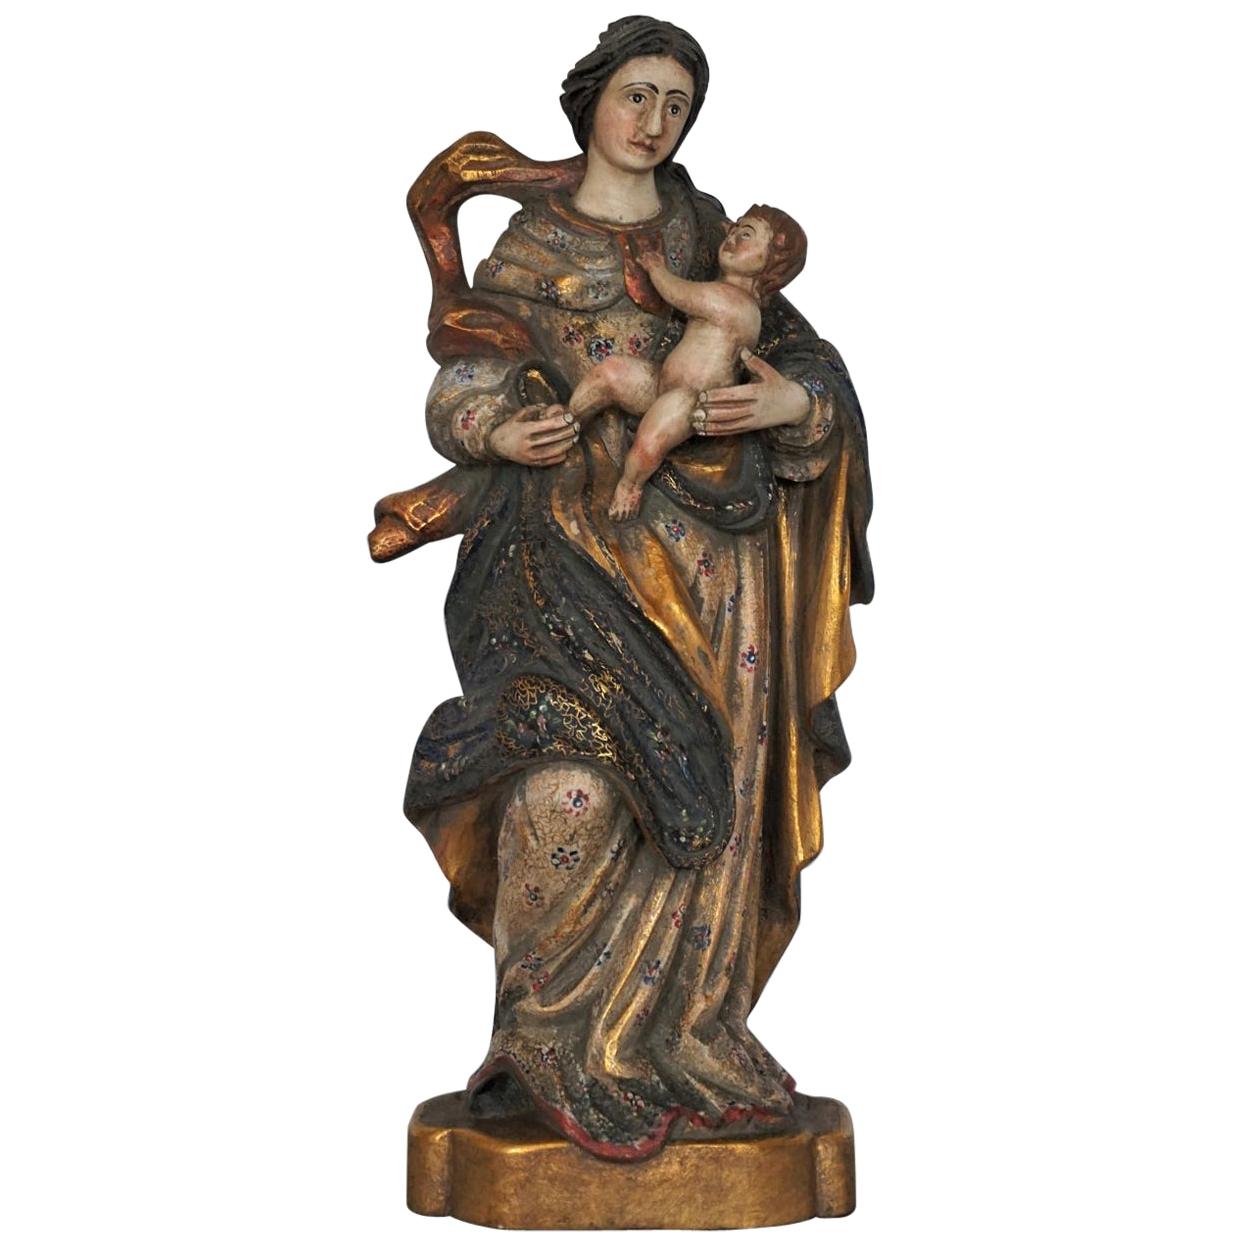 Madonna Carved Wood Sculpture Gold Leaf and Polychrome, Spain Mid-18th Century